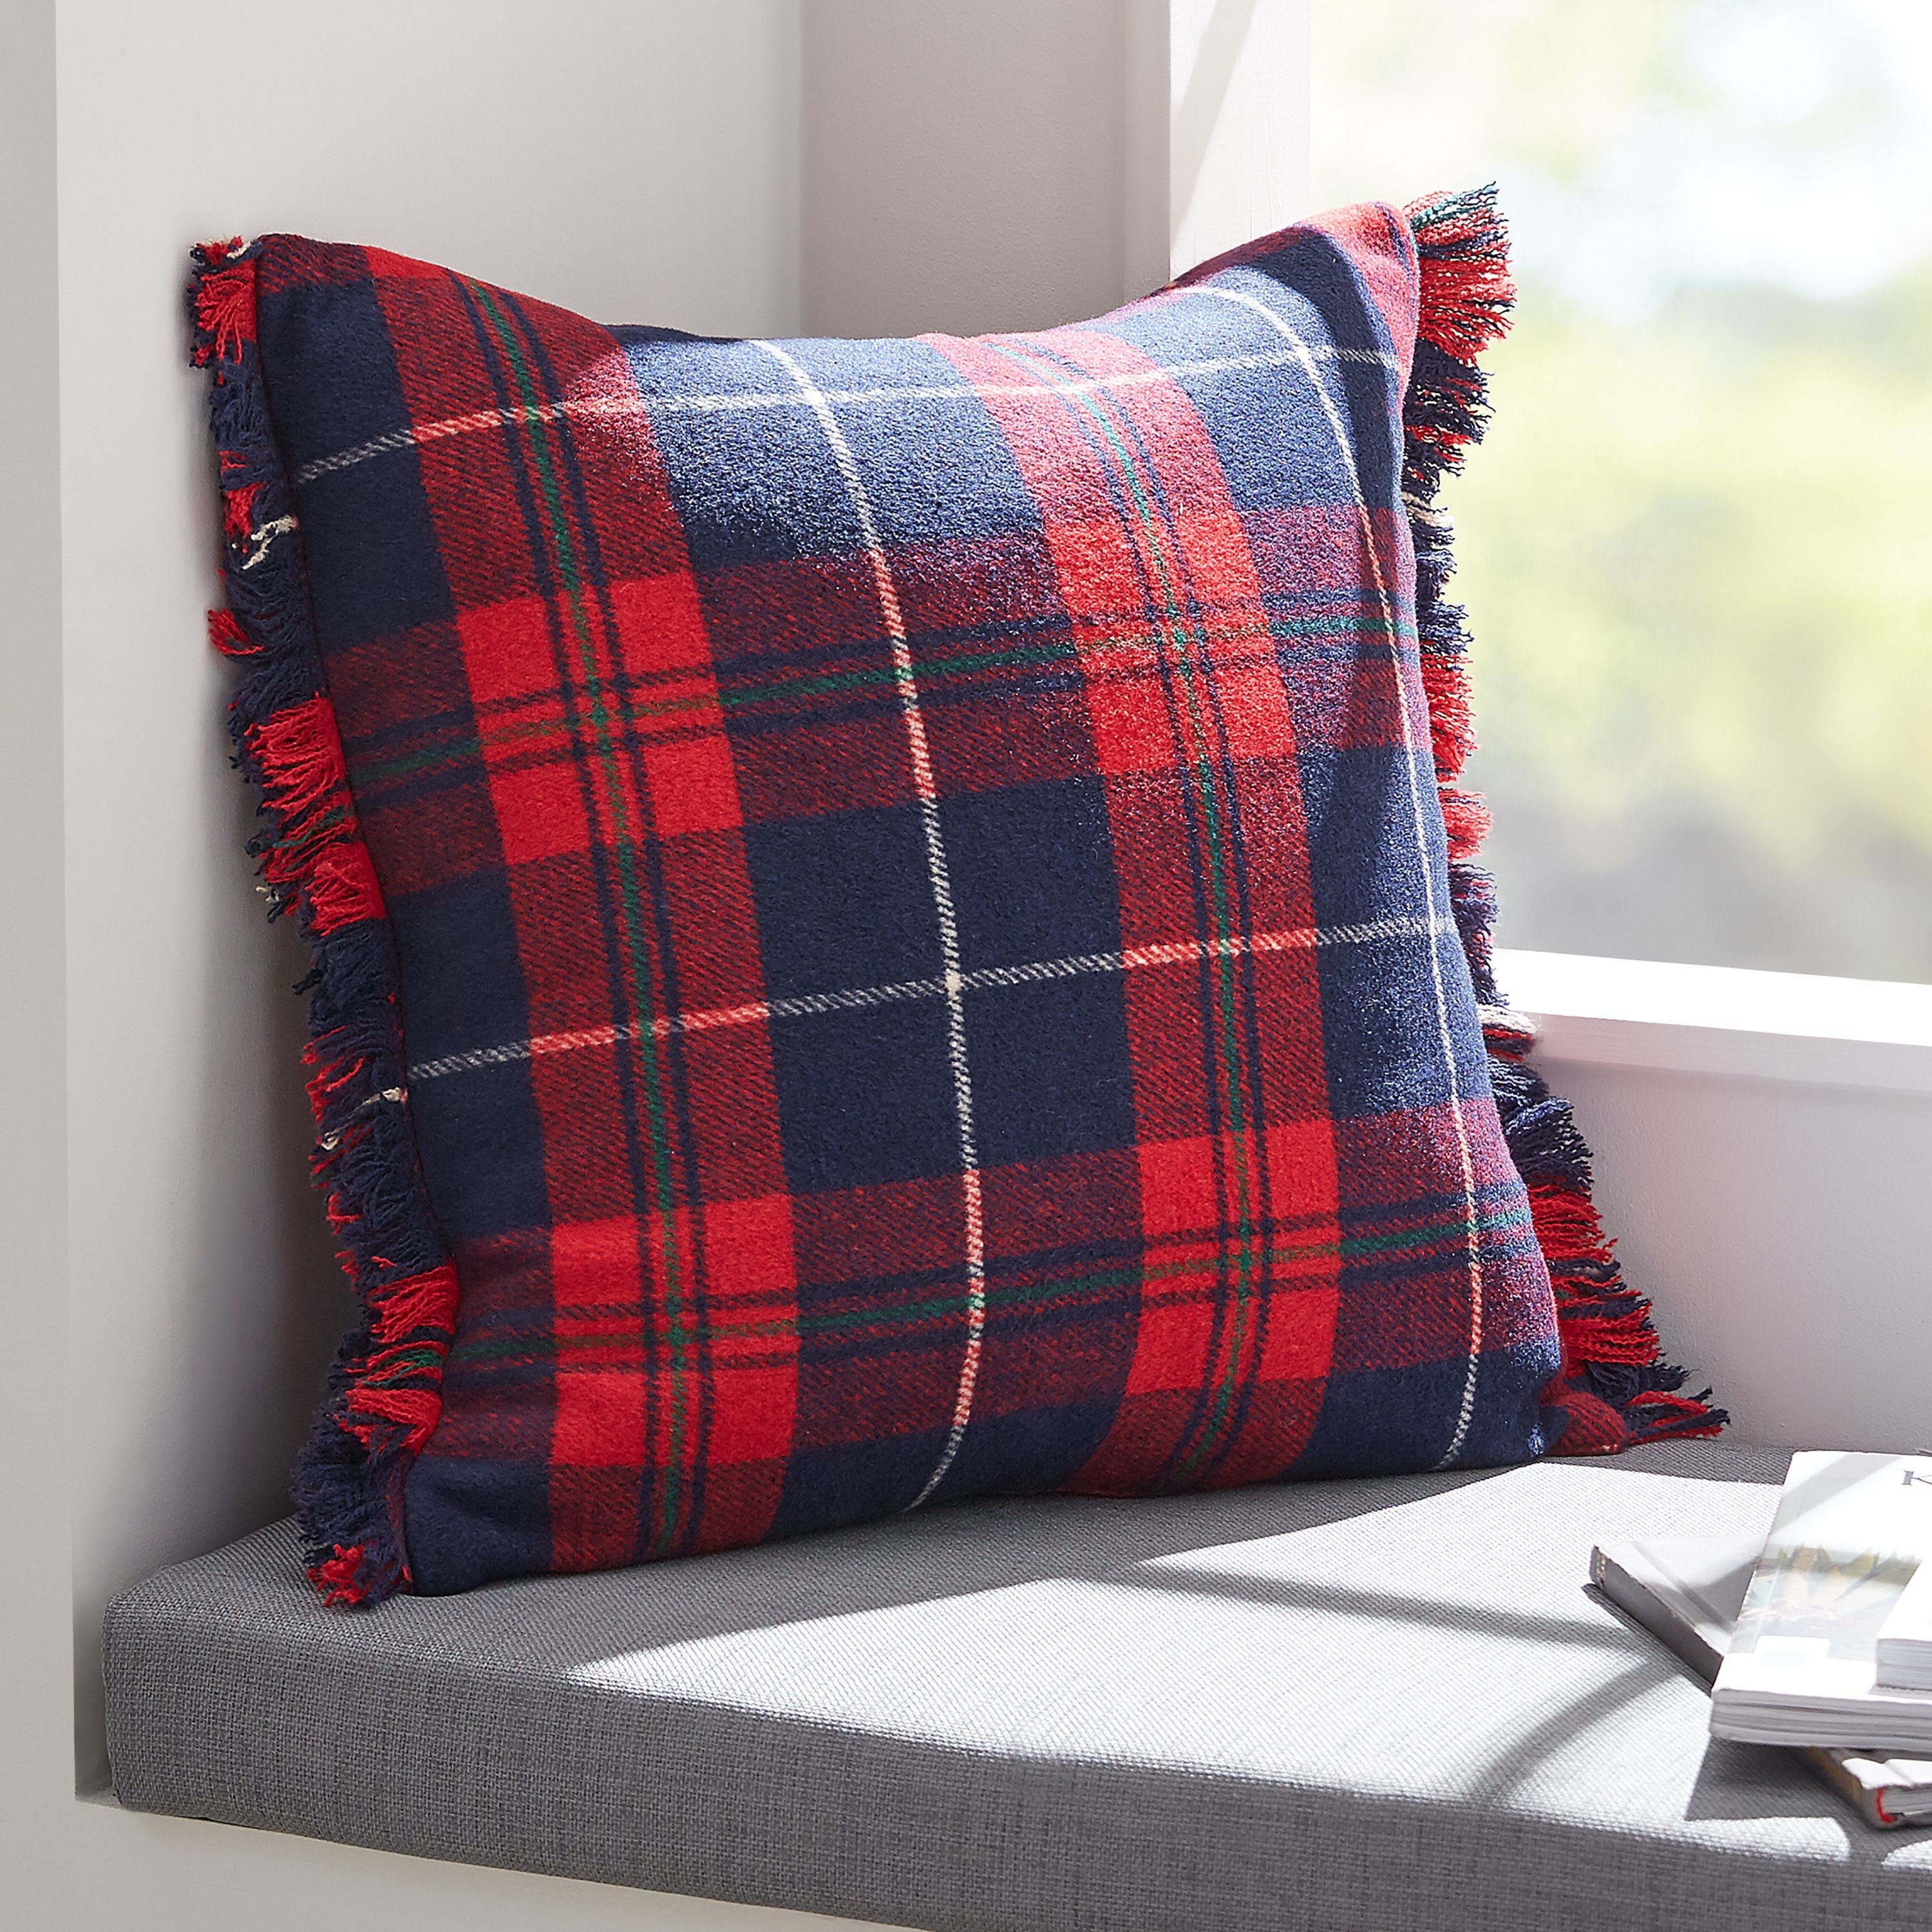 red and navy plaid pillow near a window